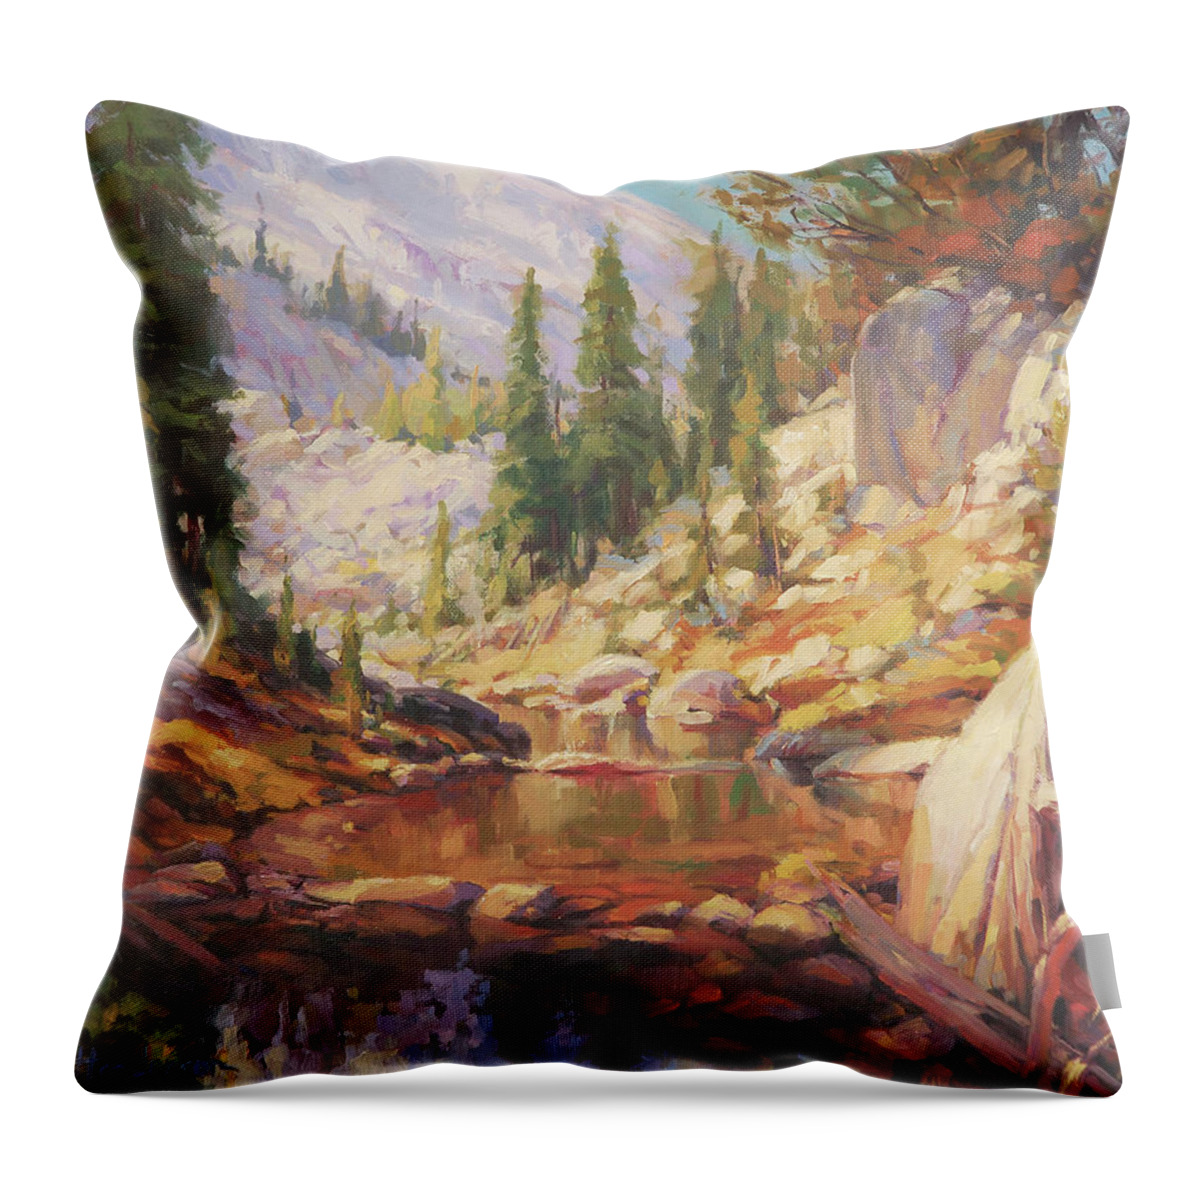 Wilderness Throw Pillow featuring the painting Cantata by Steve Henderson